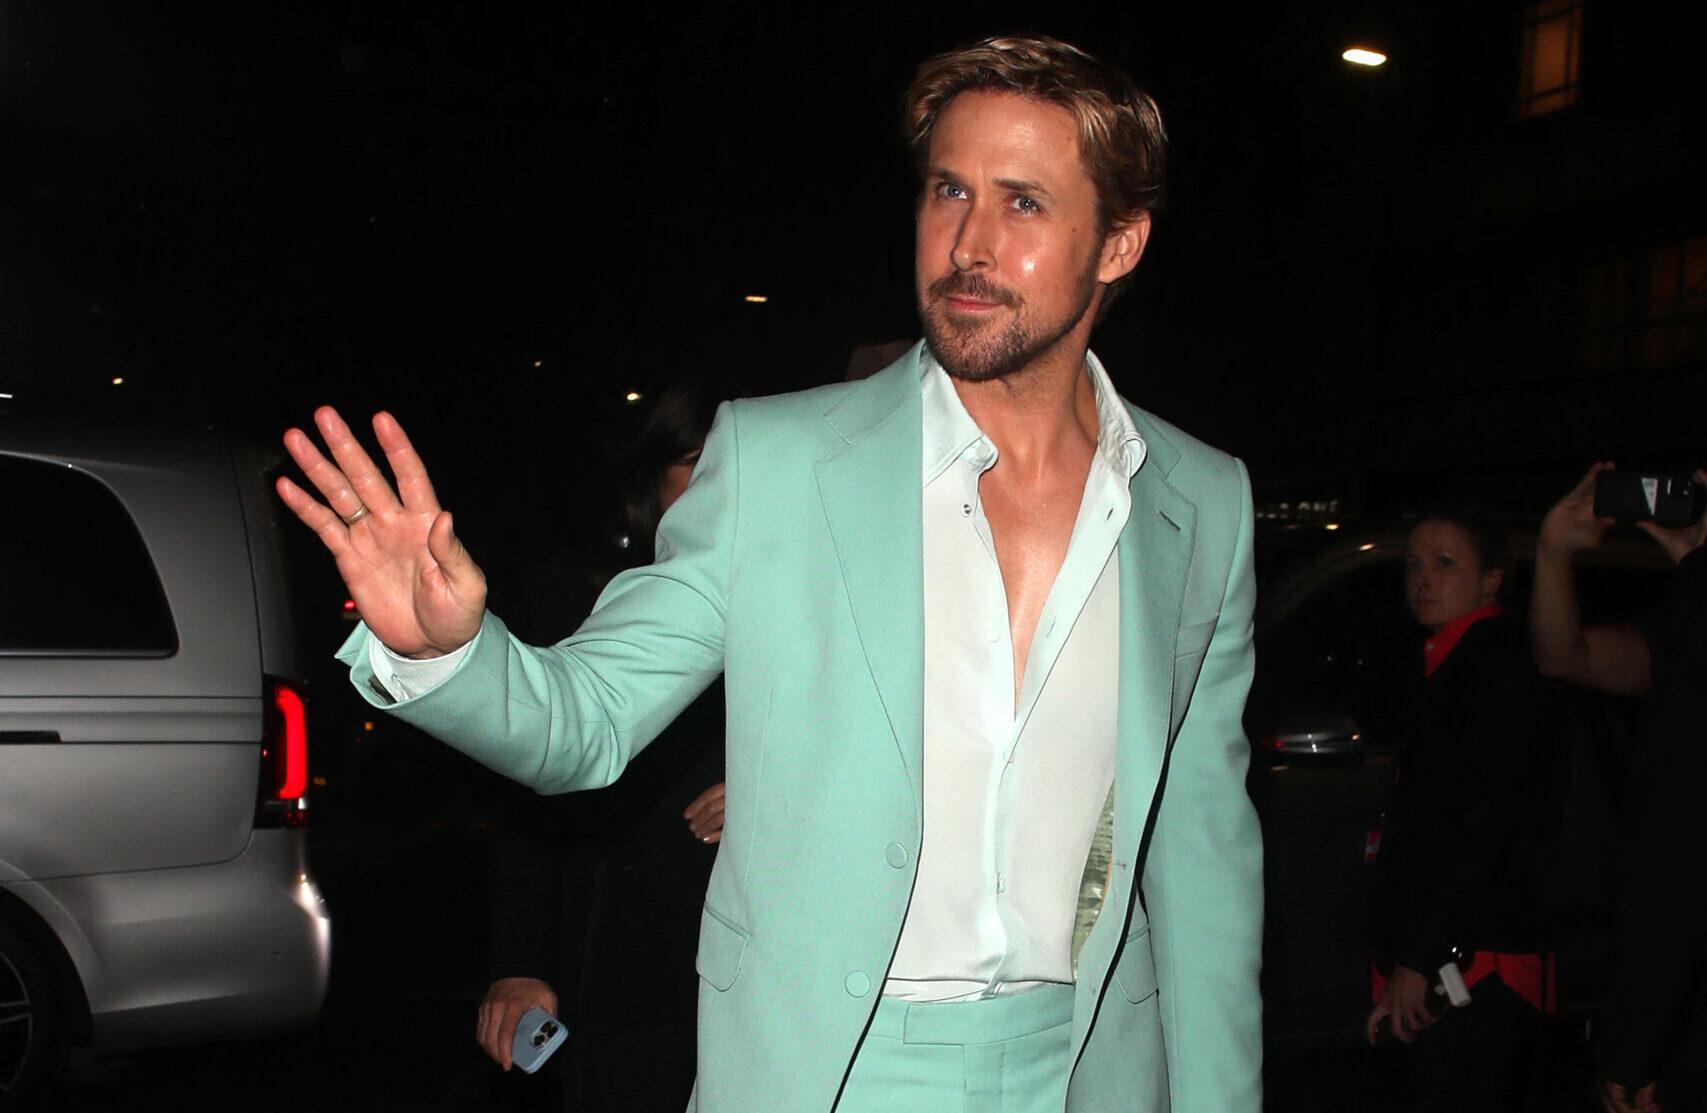 Ryan Gosling is now a Billboard Hot 100 chartbuster